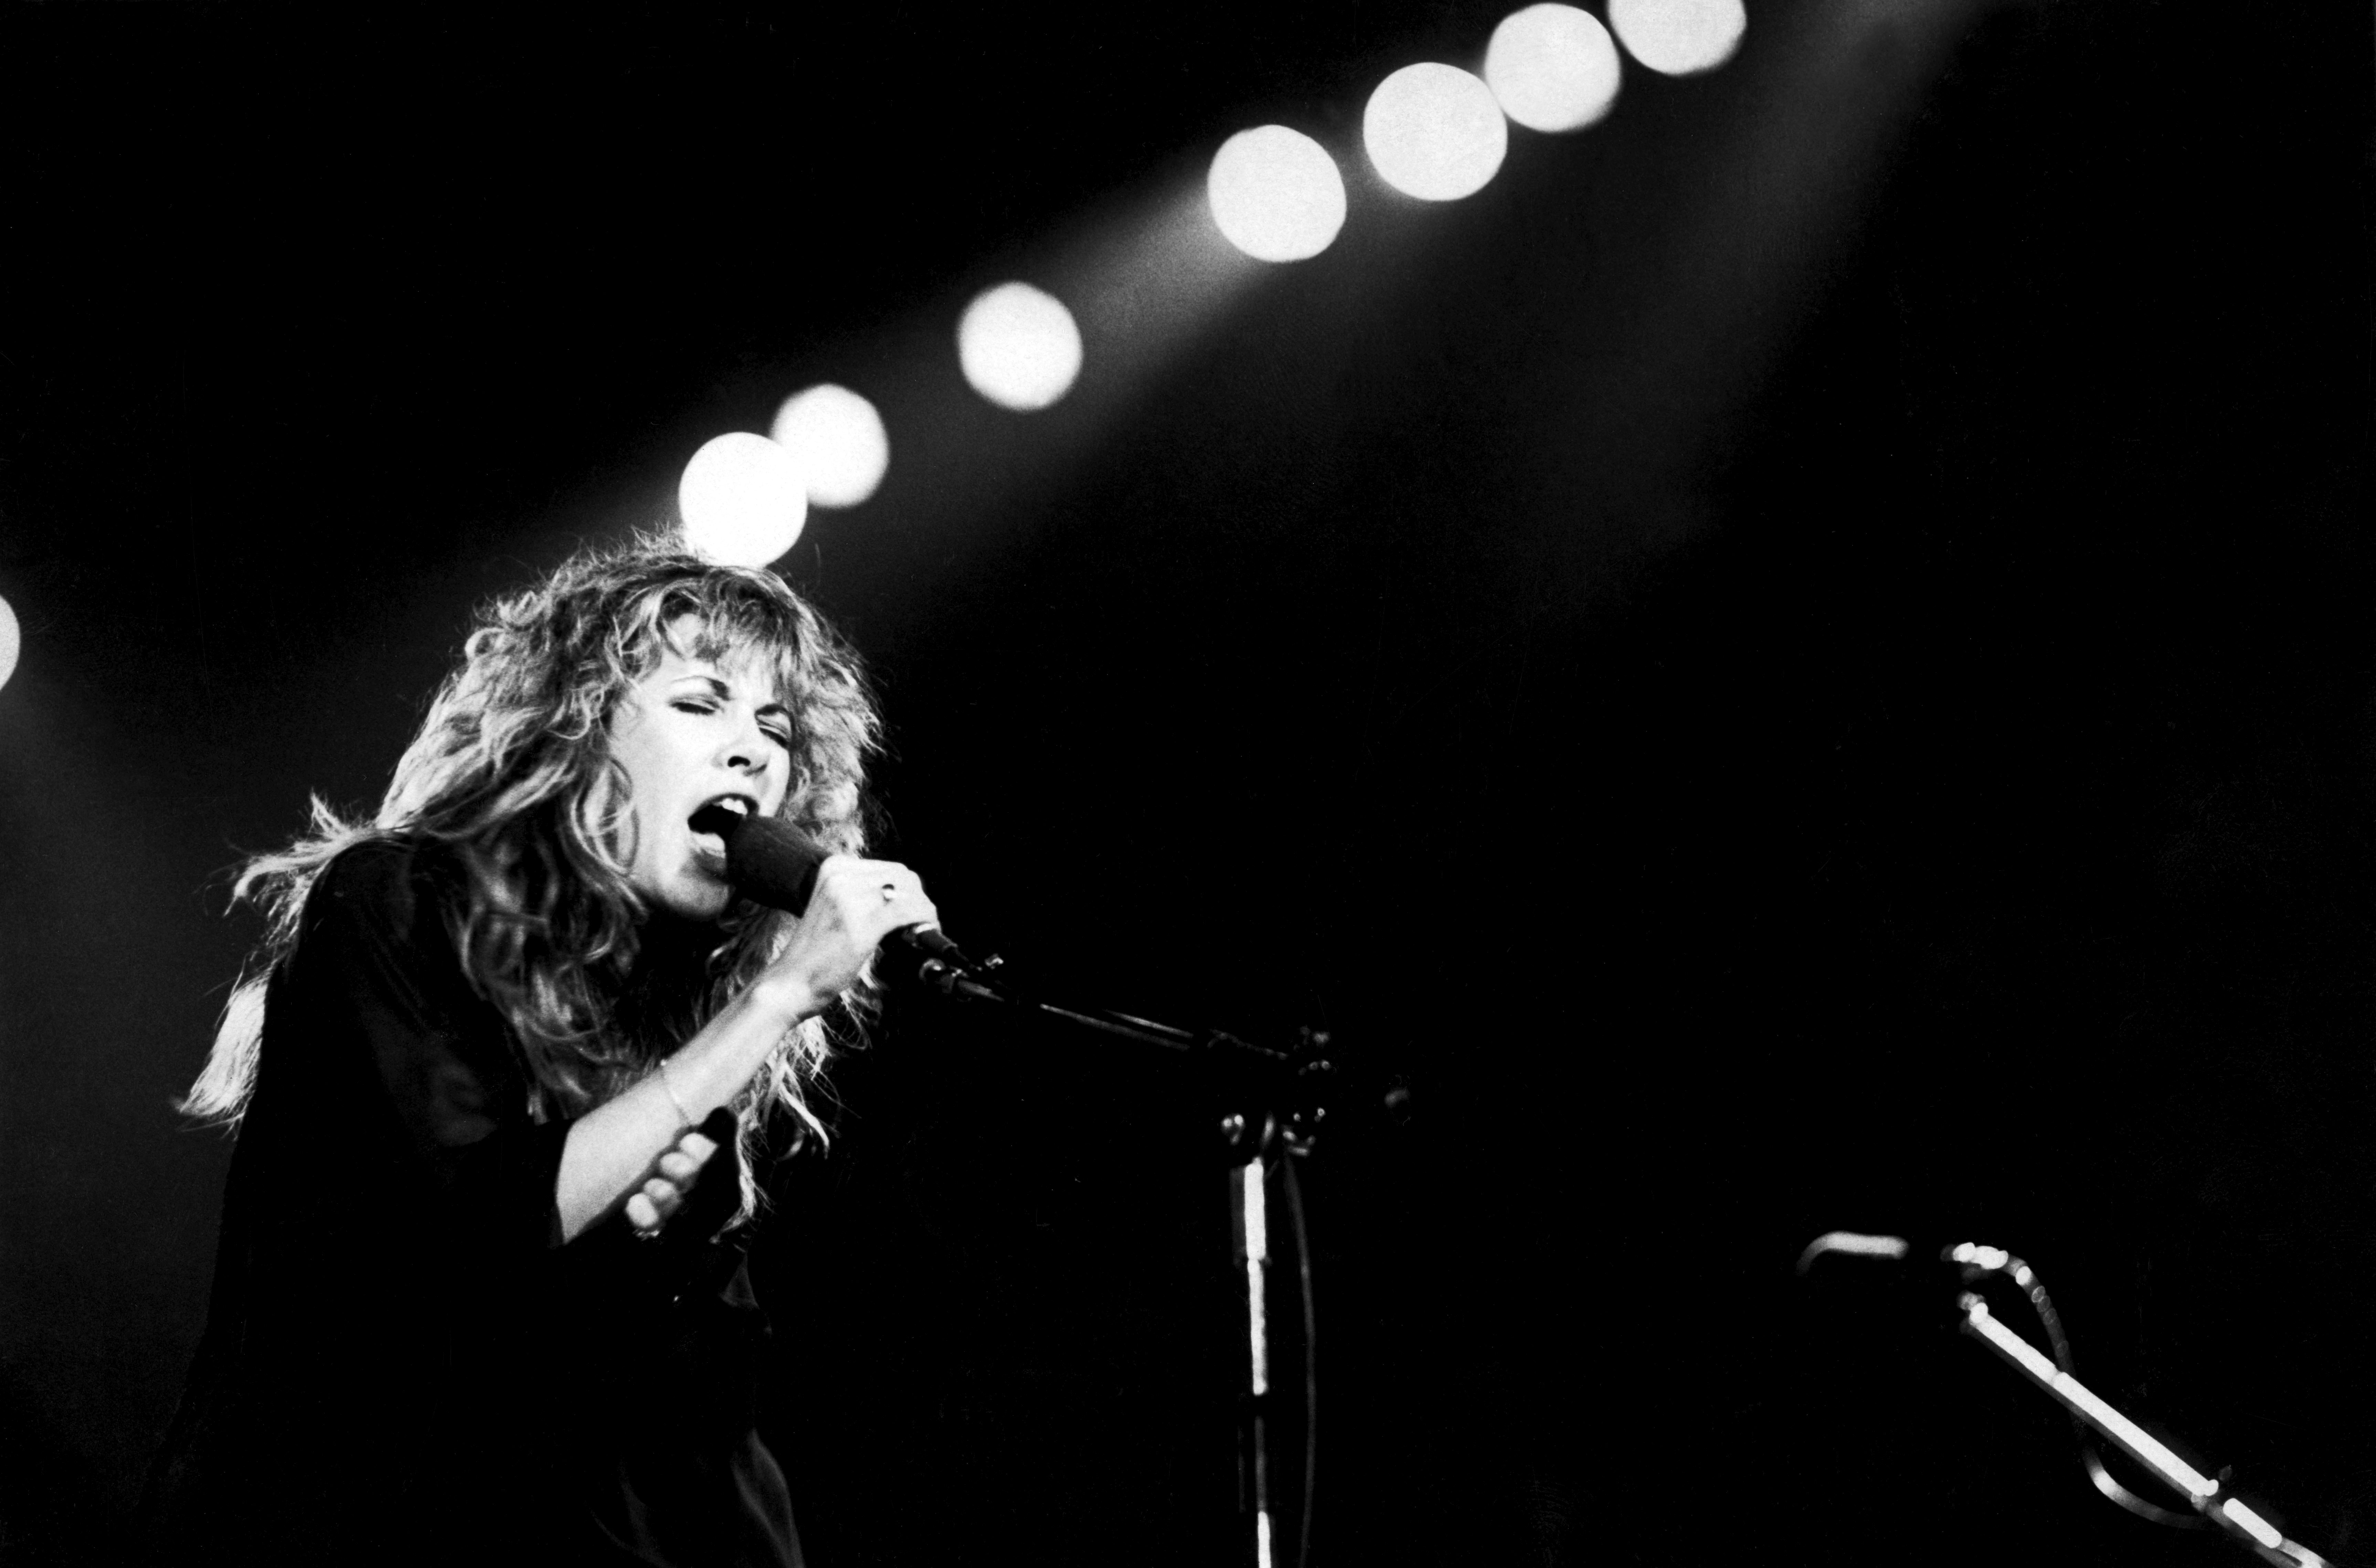 A black and white photo of Stevie Nicks singing into a microphone.